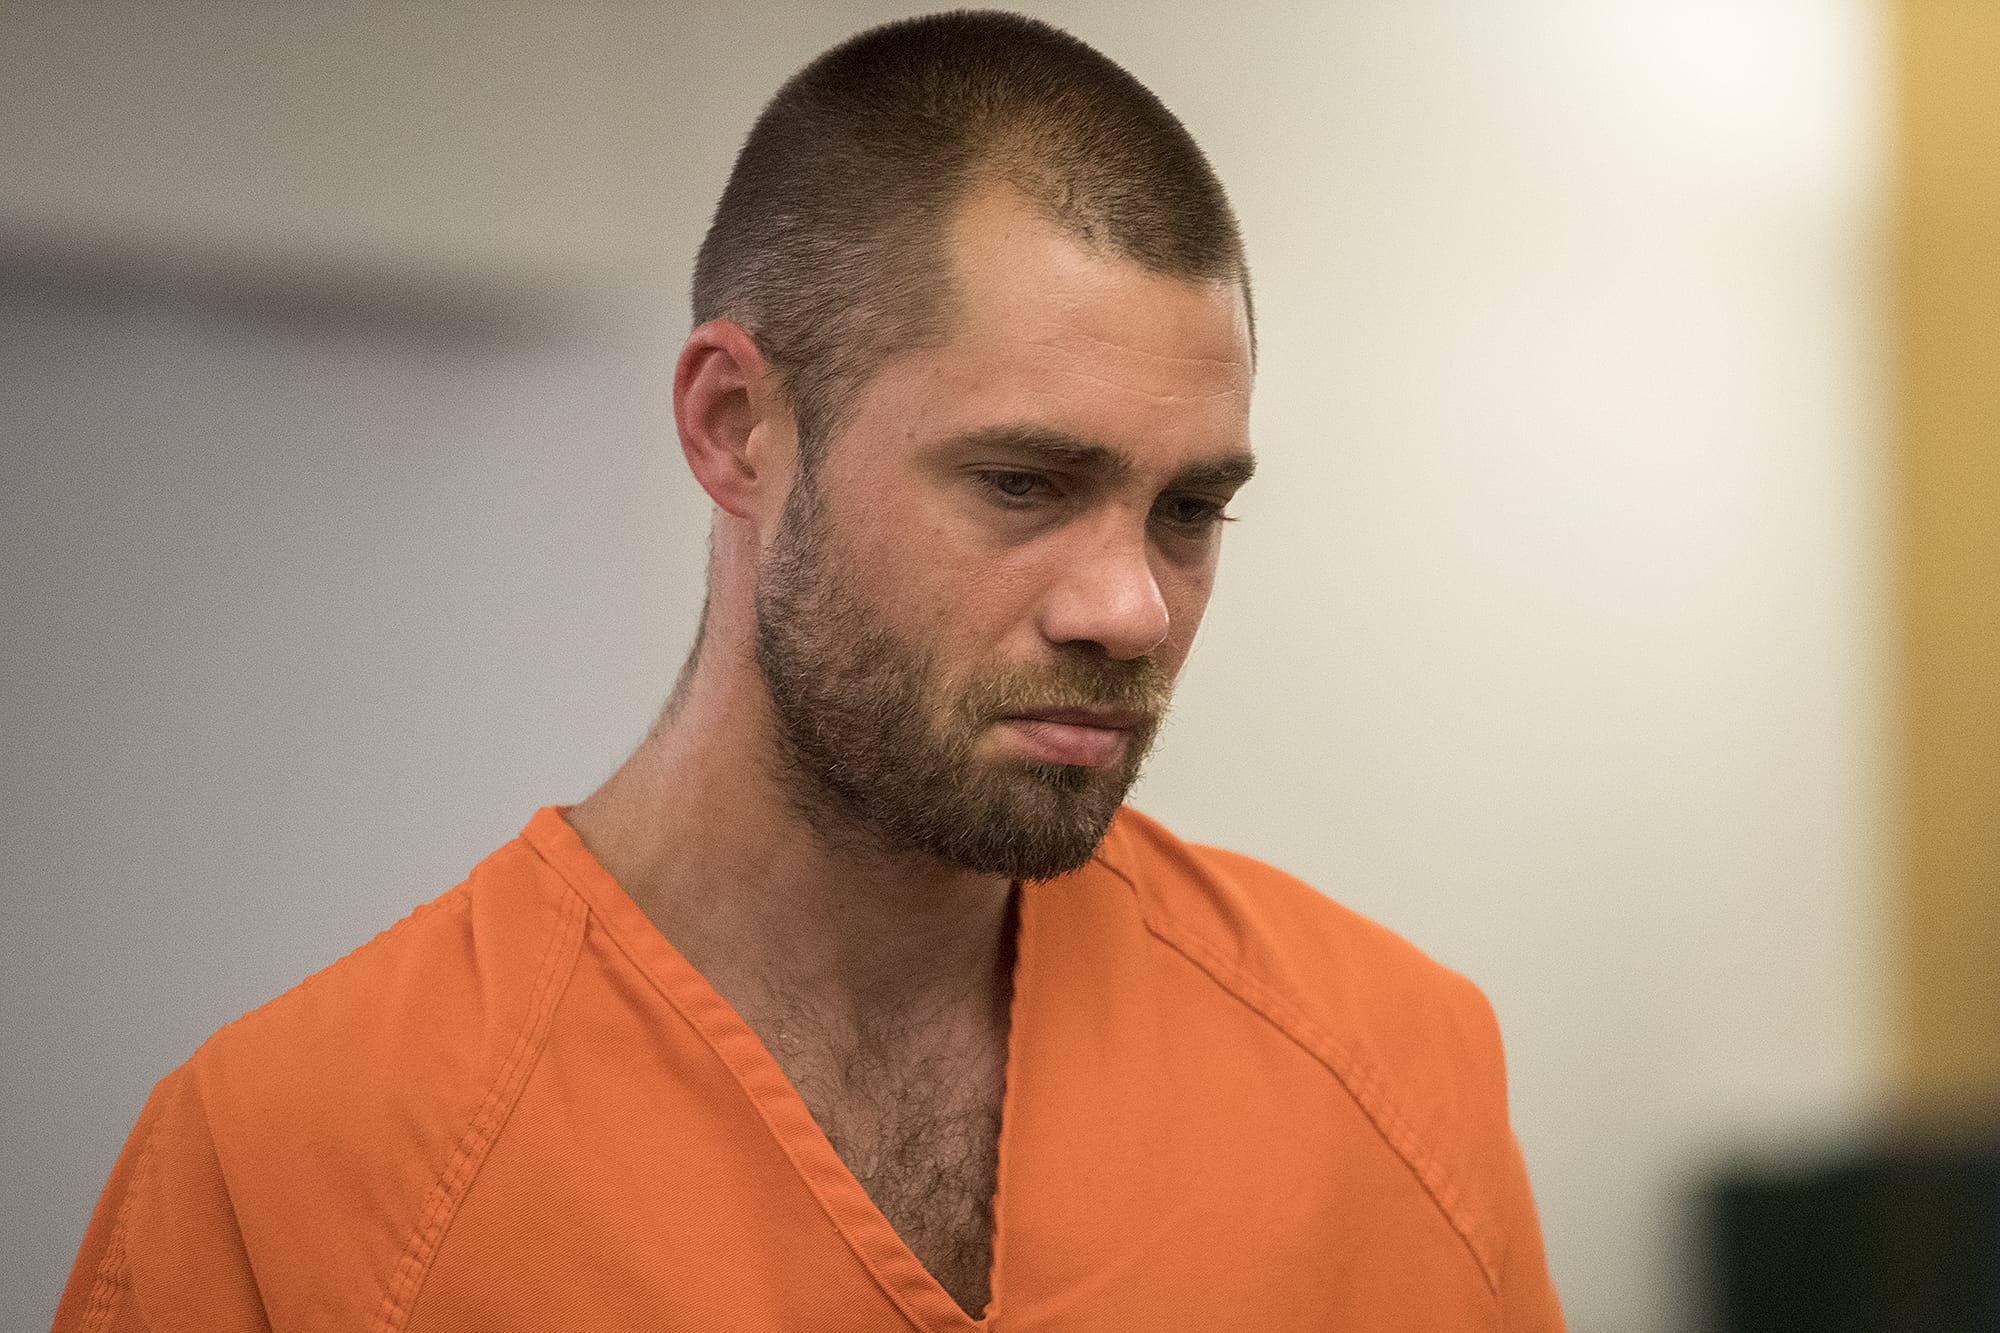 Daniel Scott Berry, 33, of Vancouver makes a first appearance Tuesday morning in Clark County Superior Court on suspicion of vehicular homicide in connection with a fatal July 8 crash in Battle Ground.